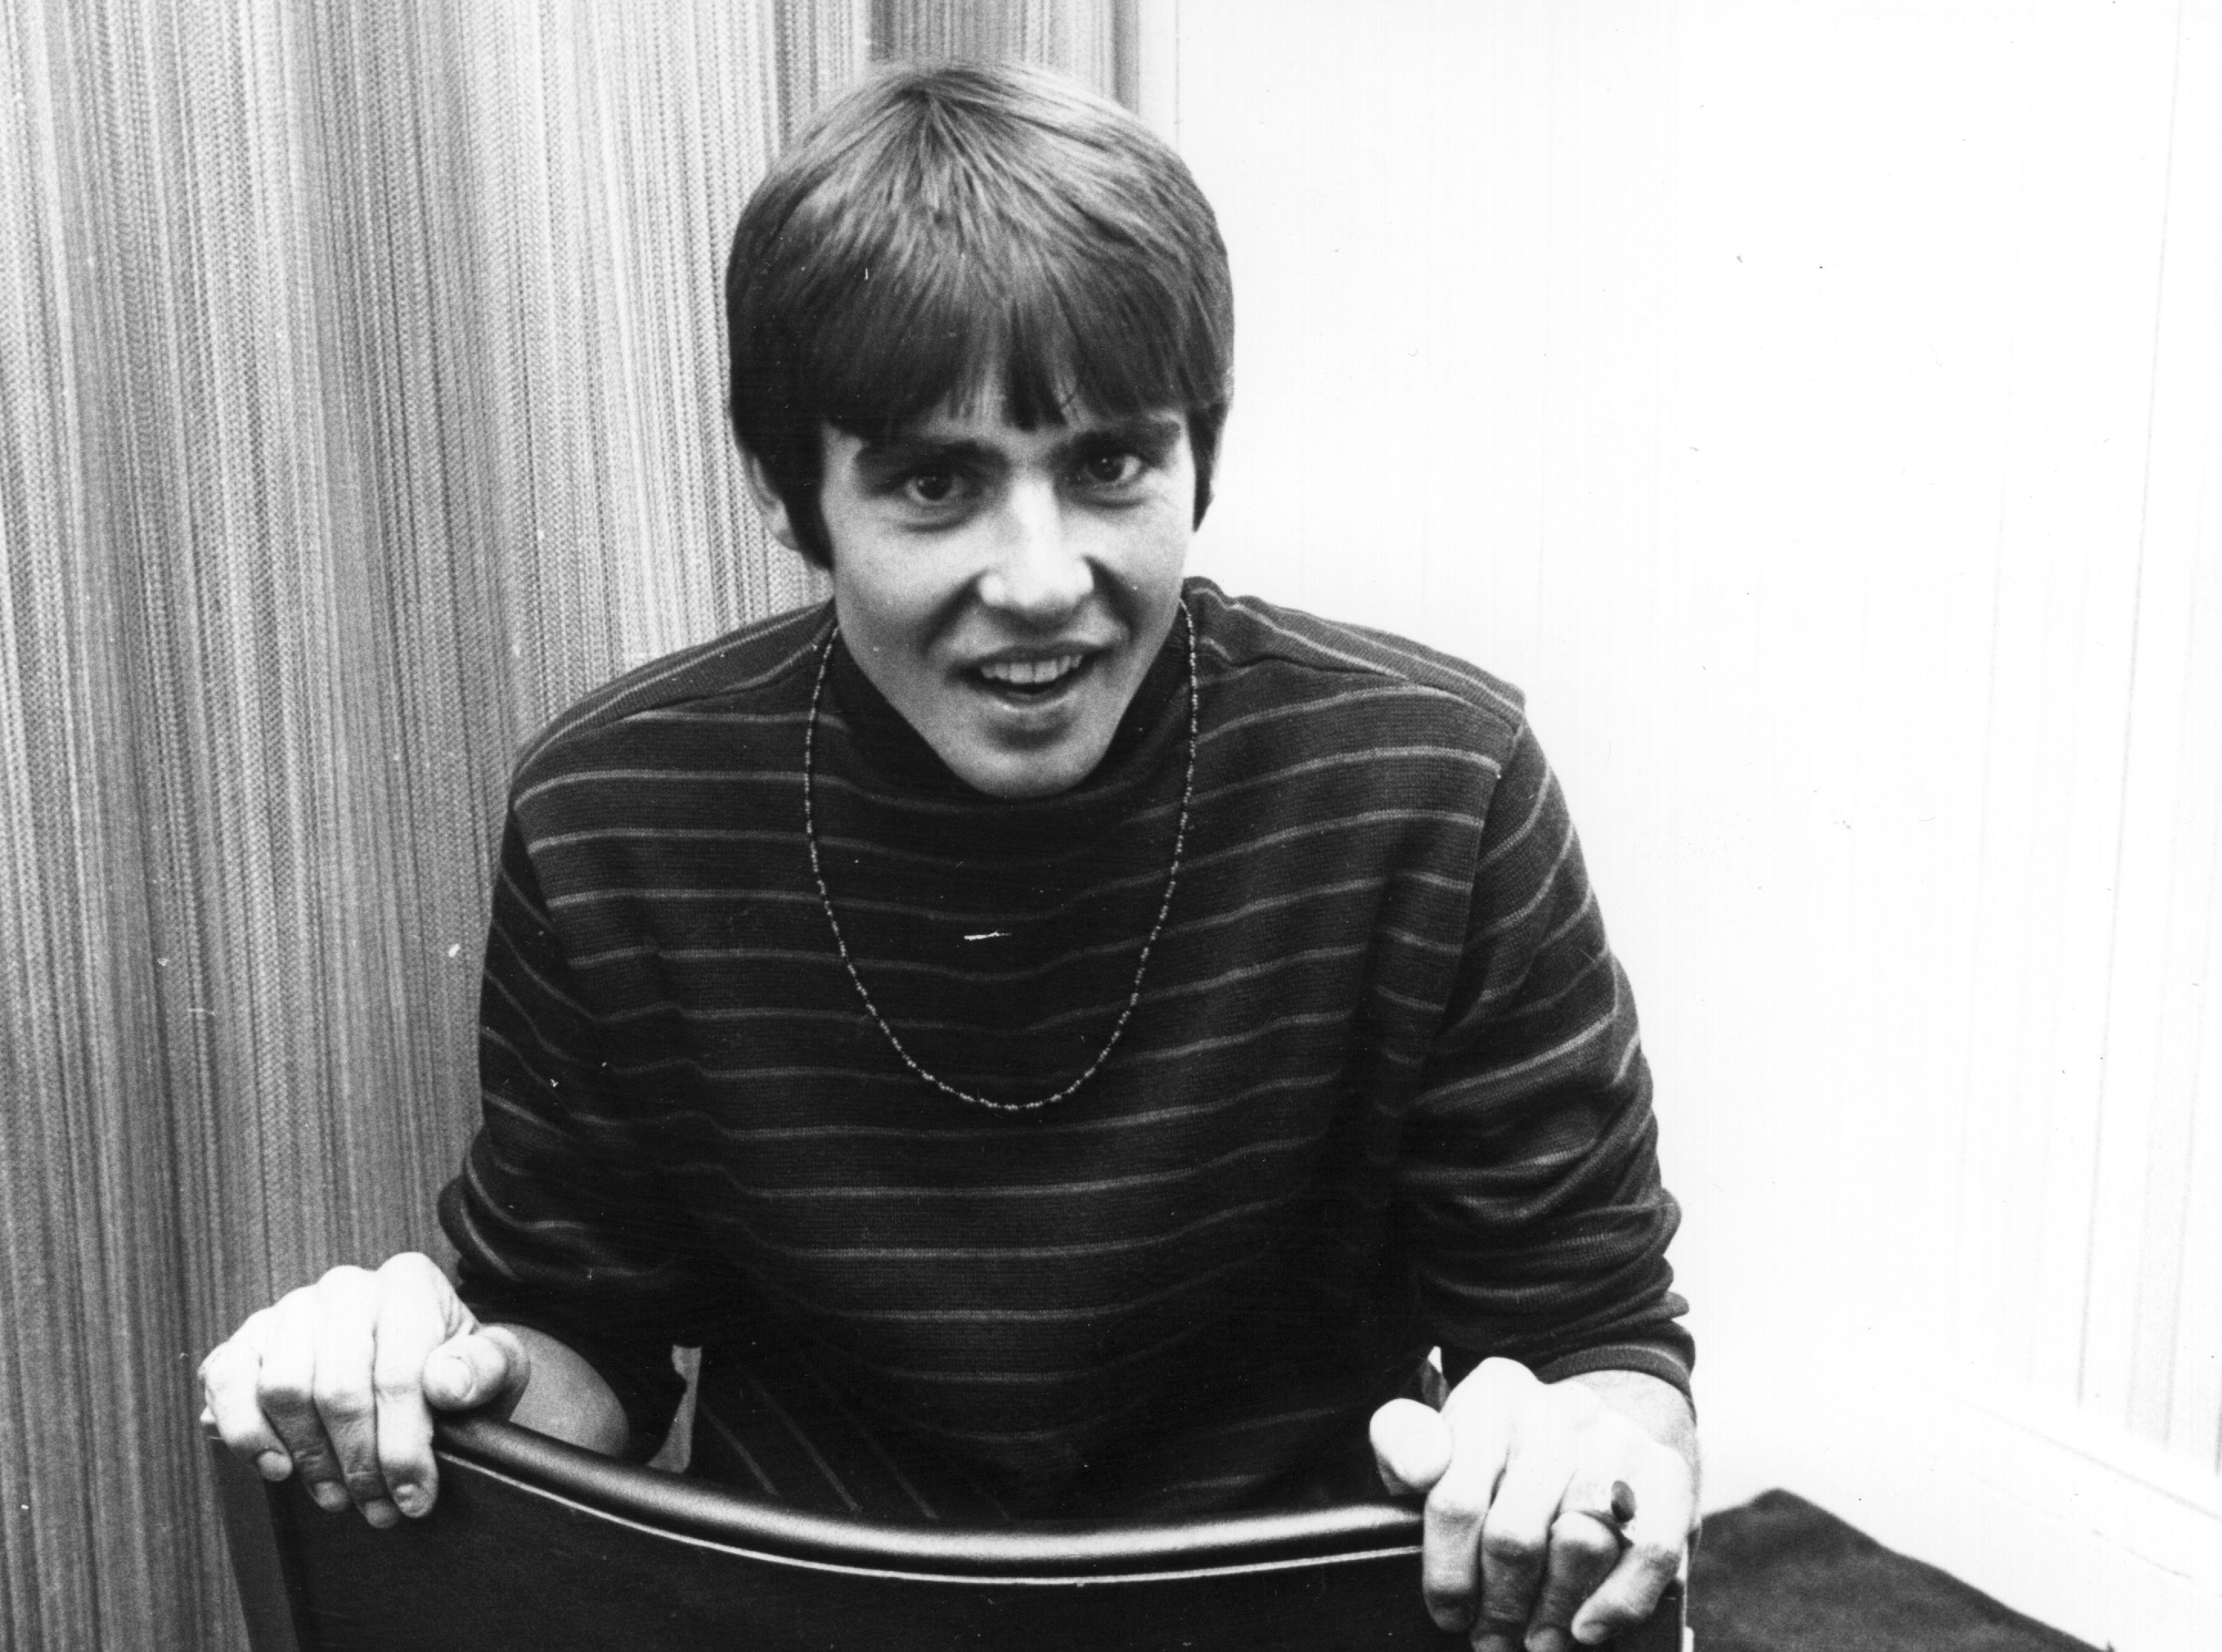 The Monkees' Davy Jones in a chair